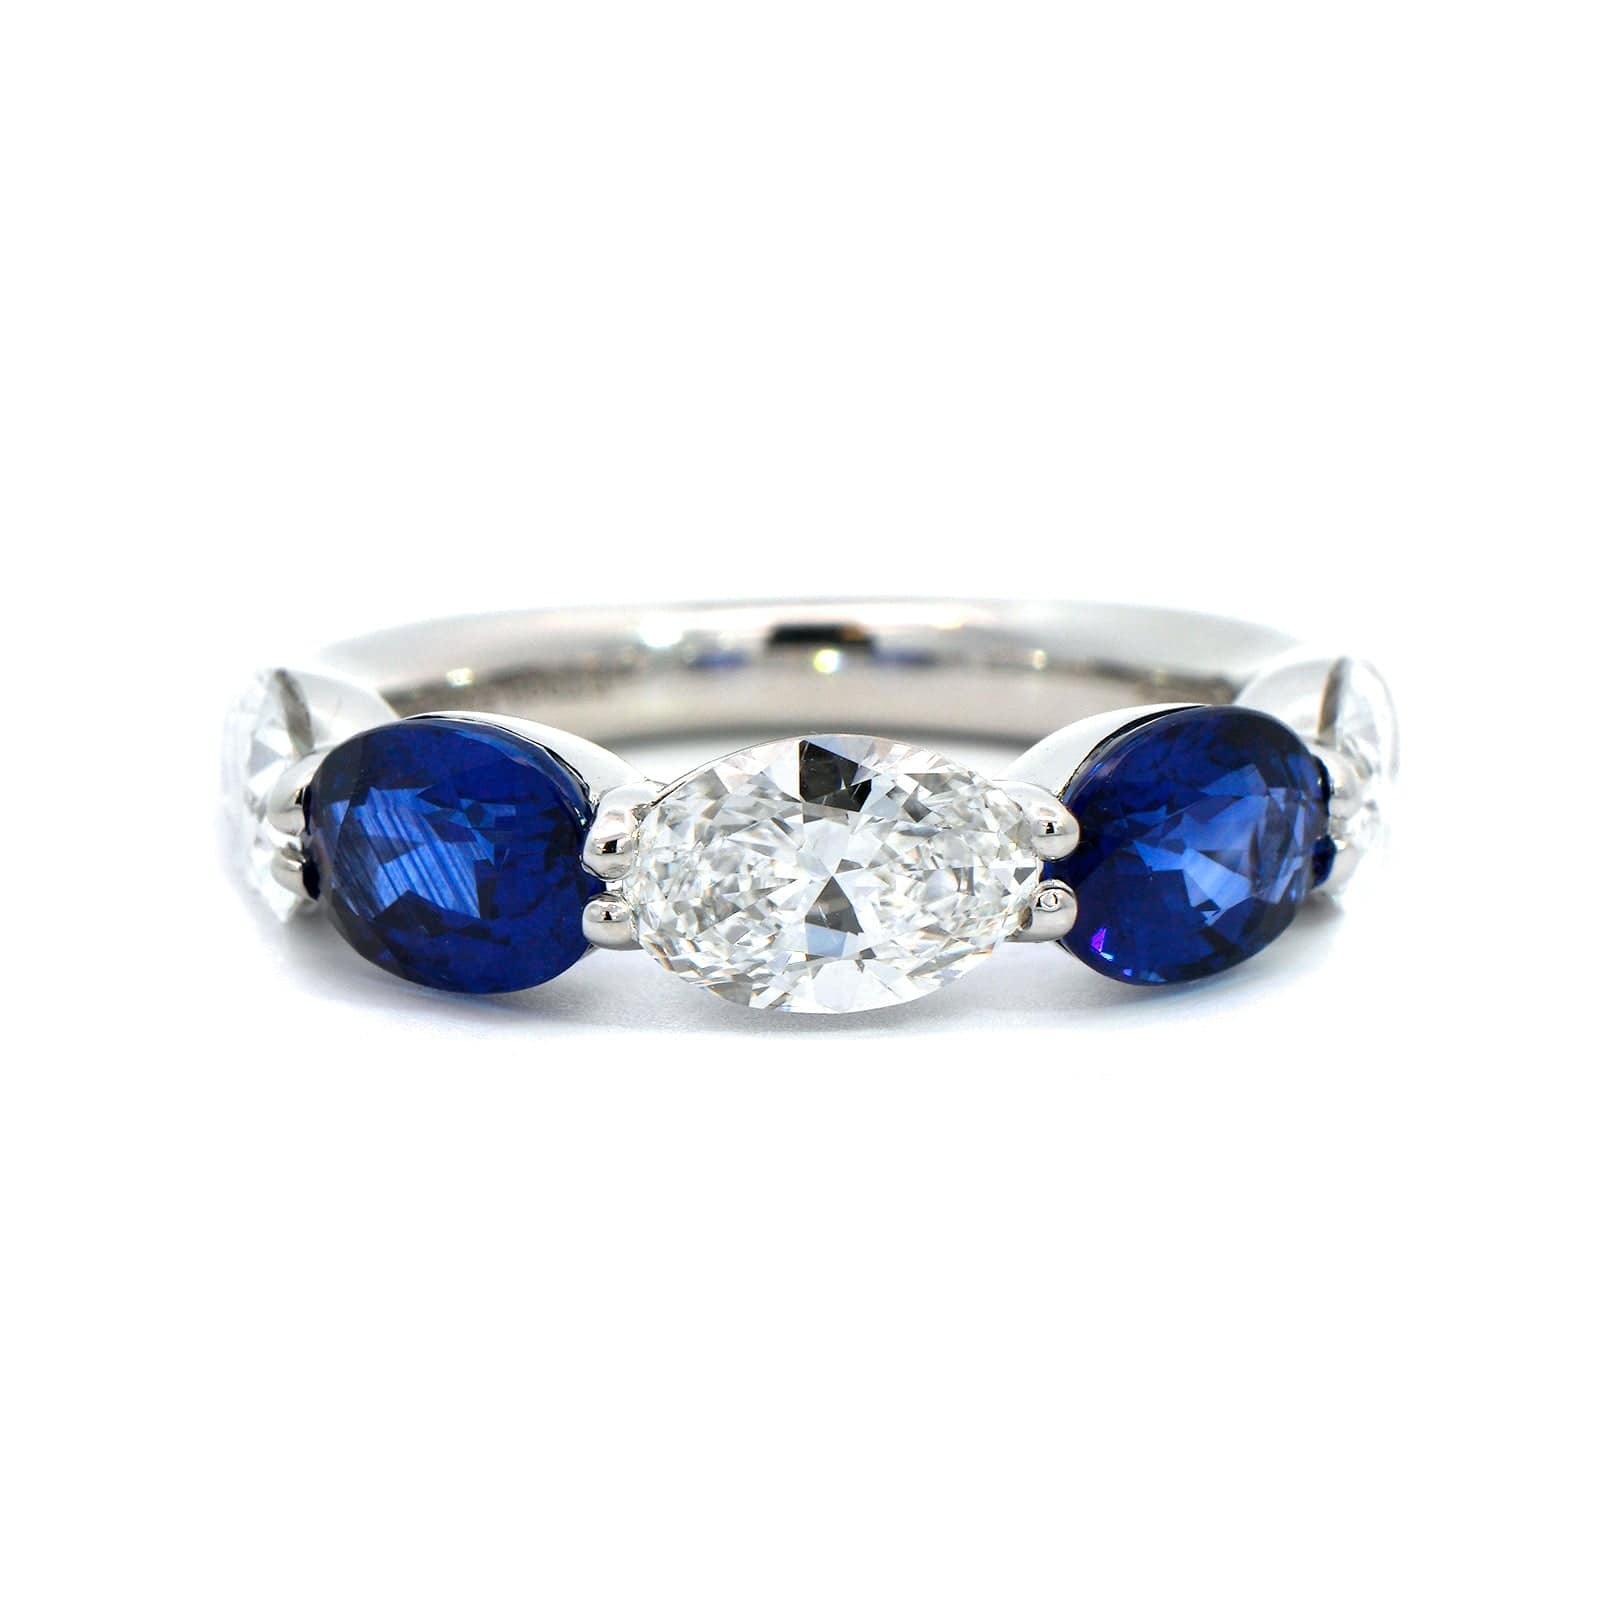 Platinum Shared Prong Alternating Oval Diamond and Sapphire Band